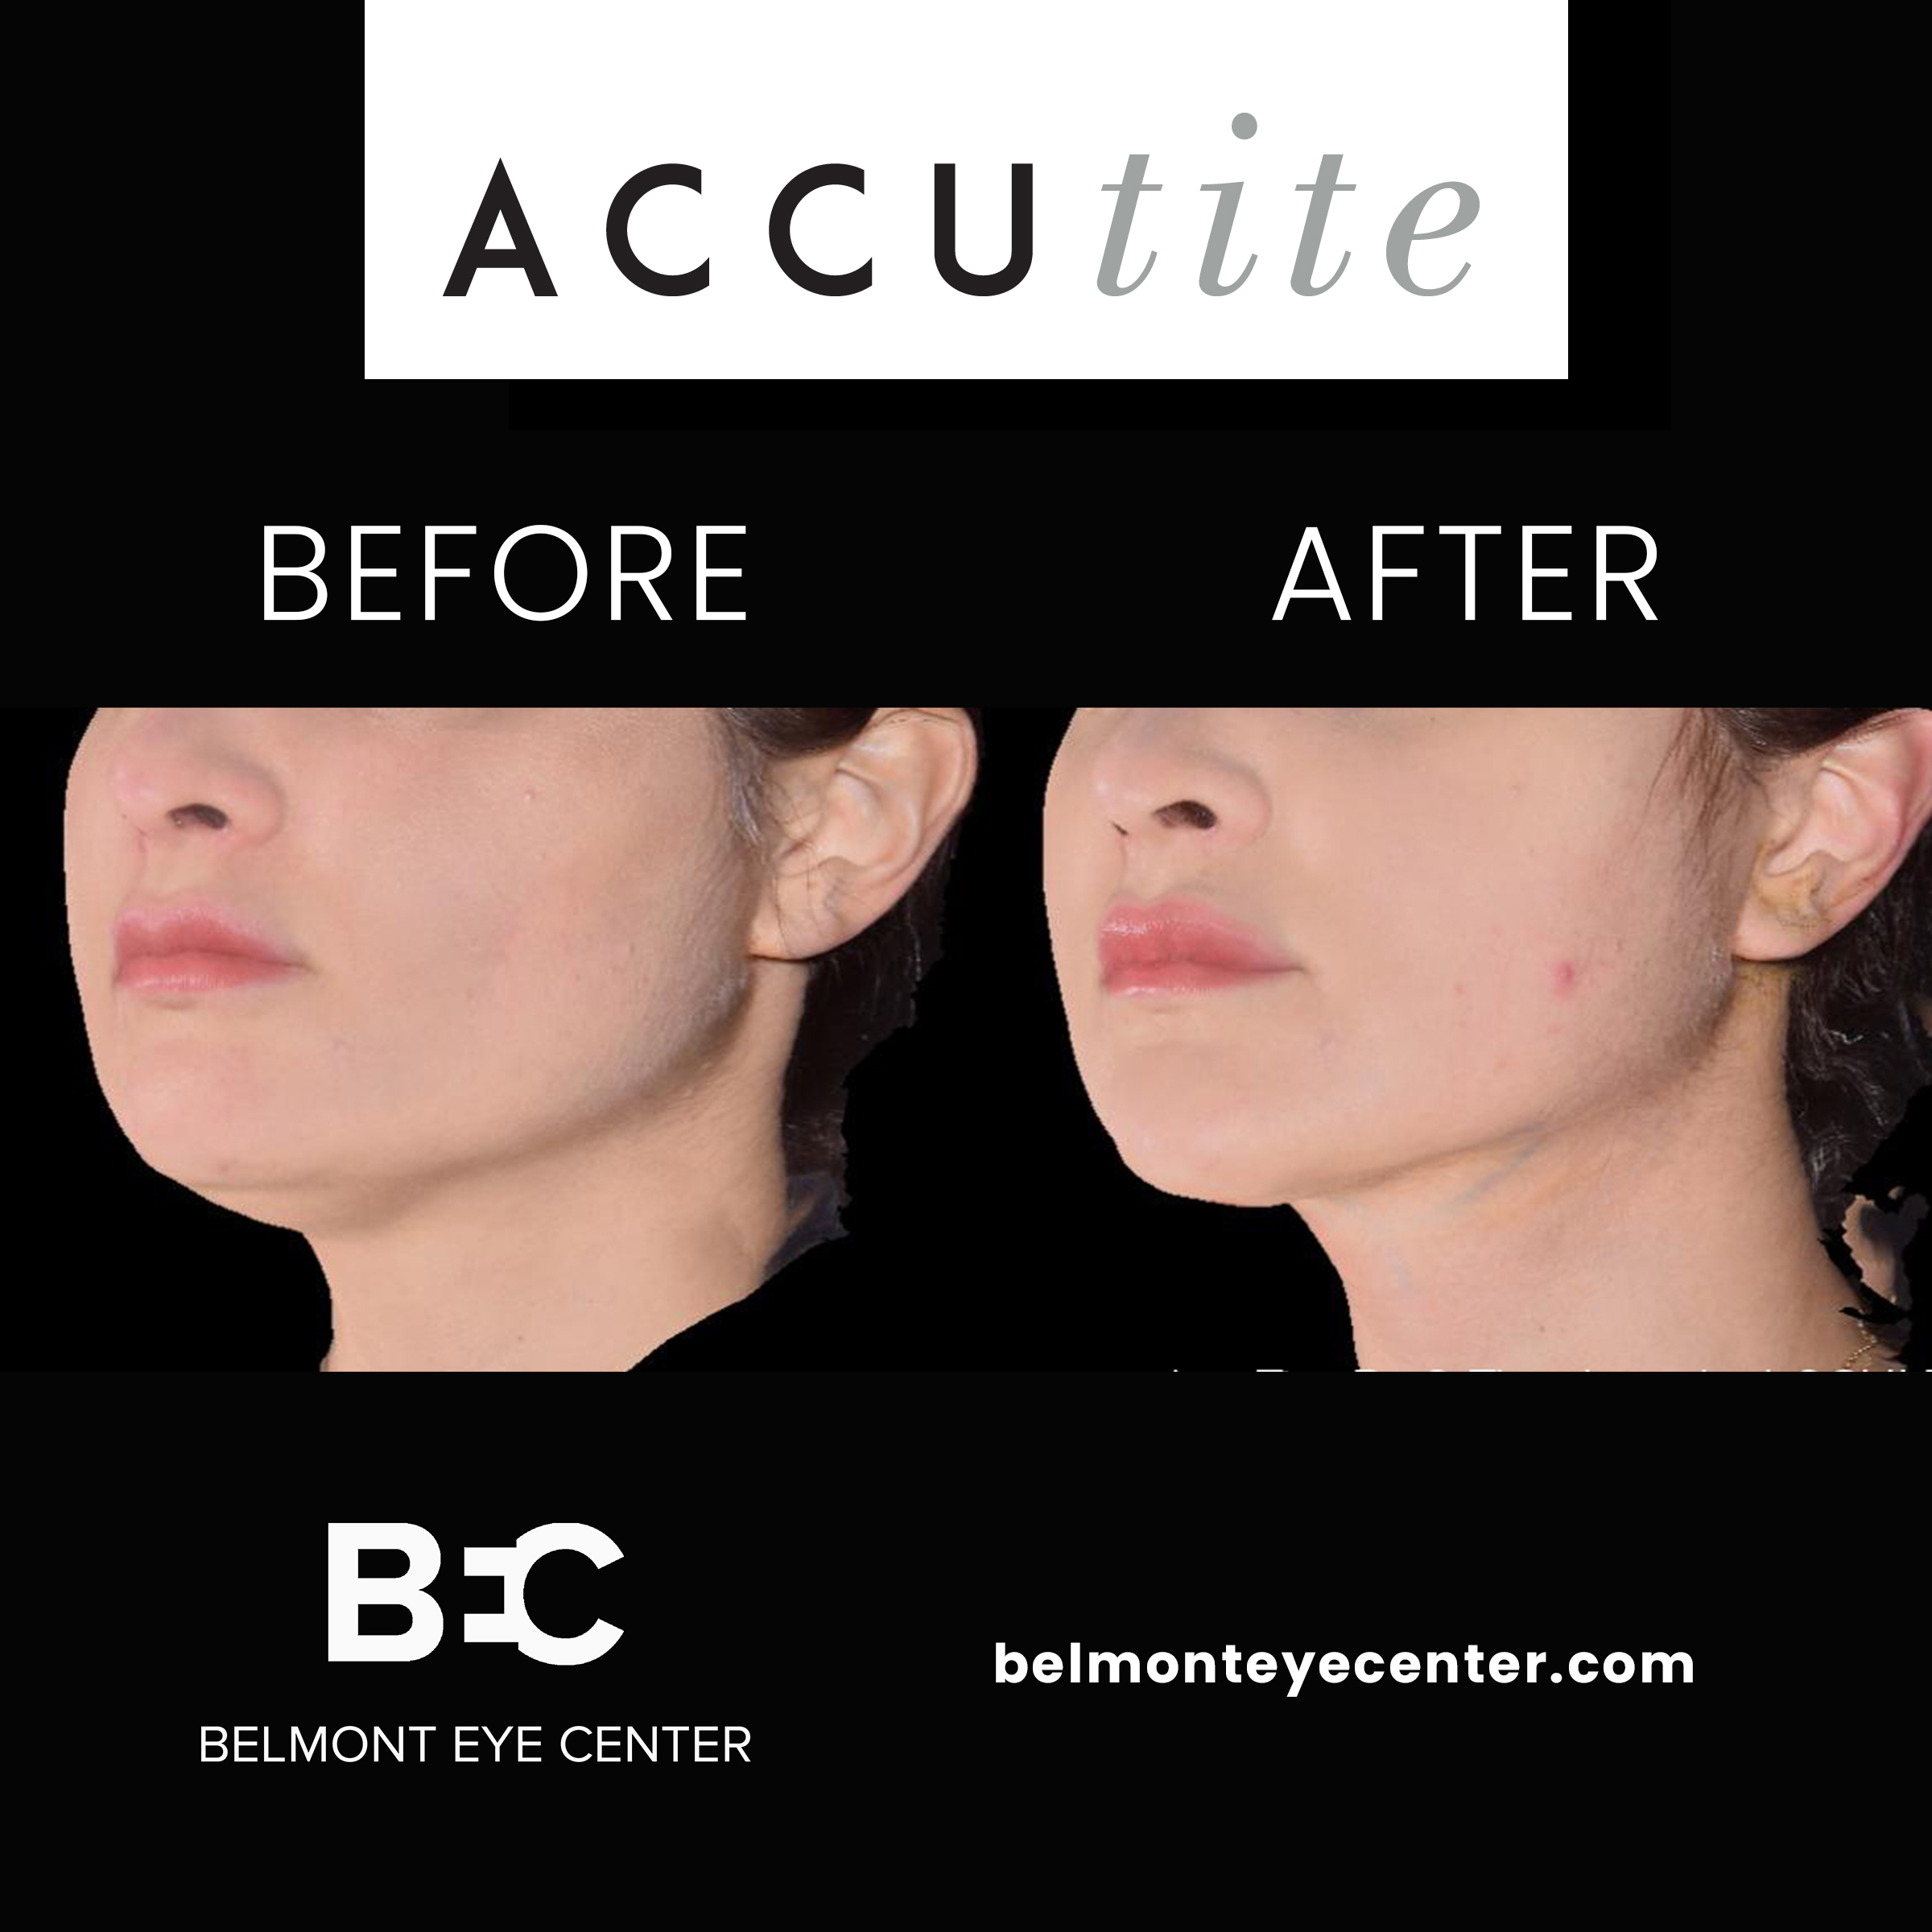 before after accutite 2